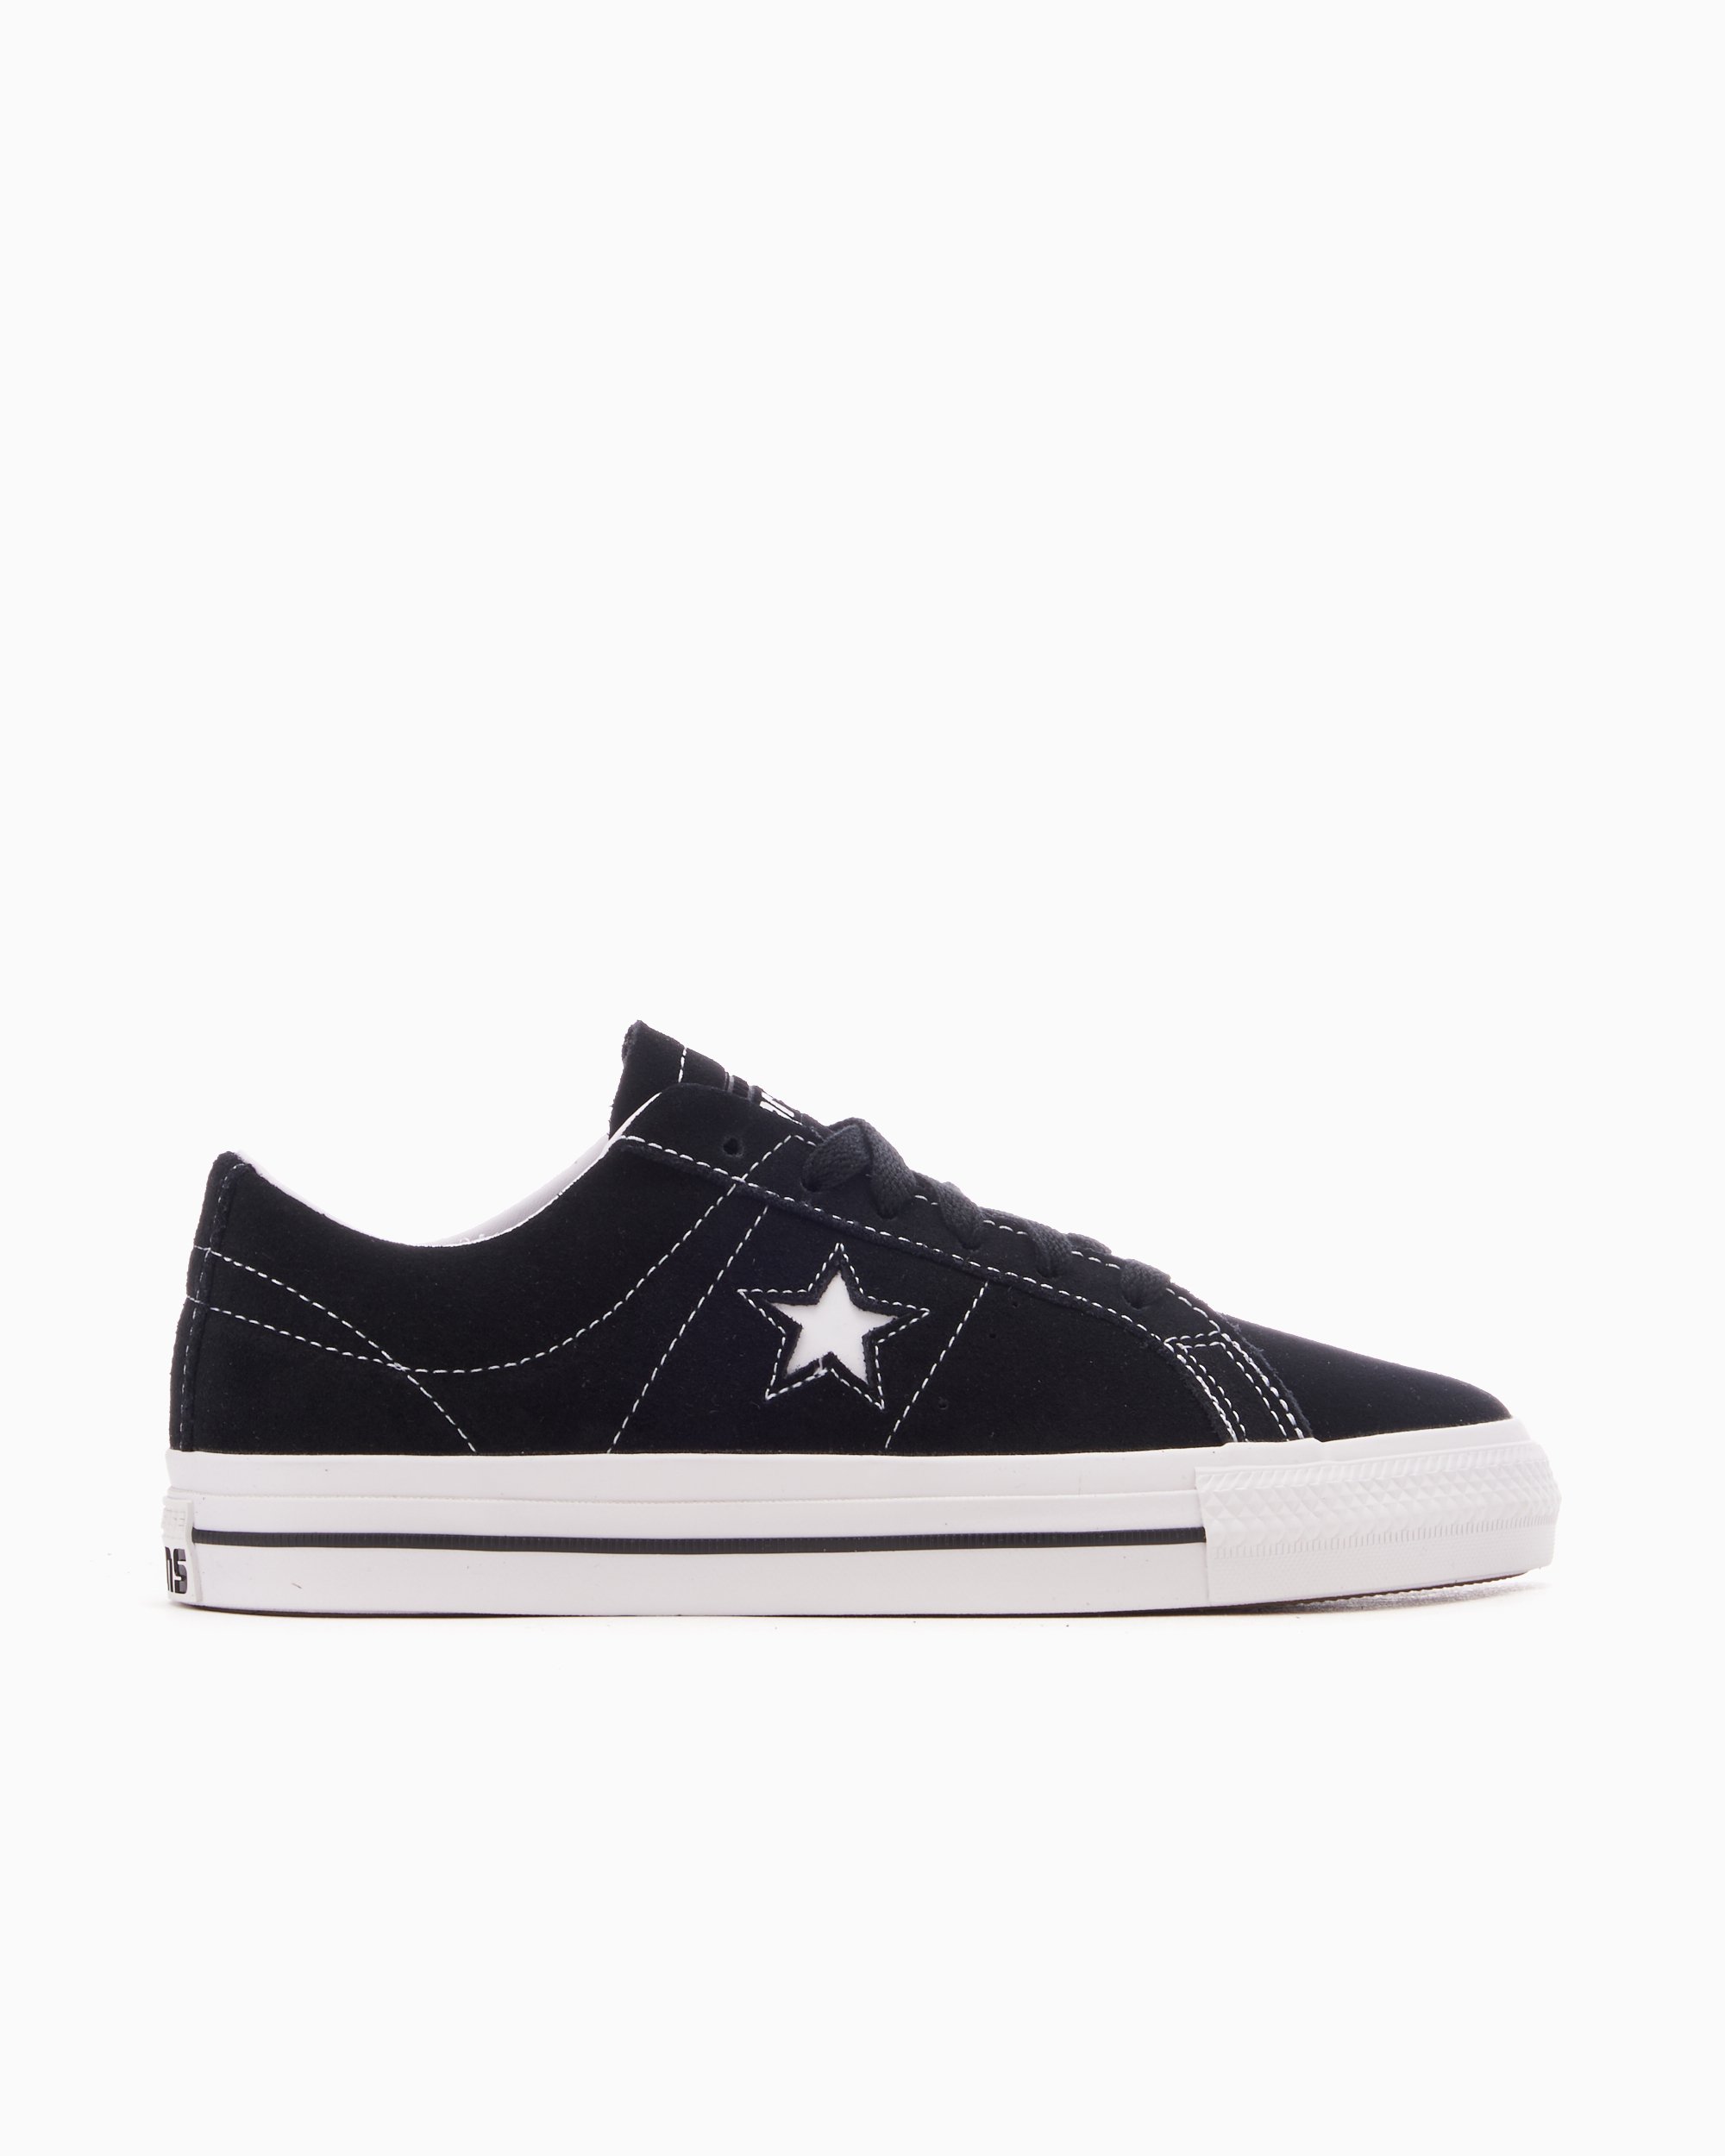 Converse One Star Pro OX Black 171327C| Buy Online at FOOTDISTRICT